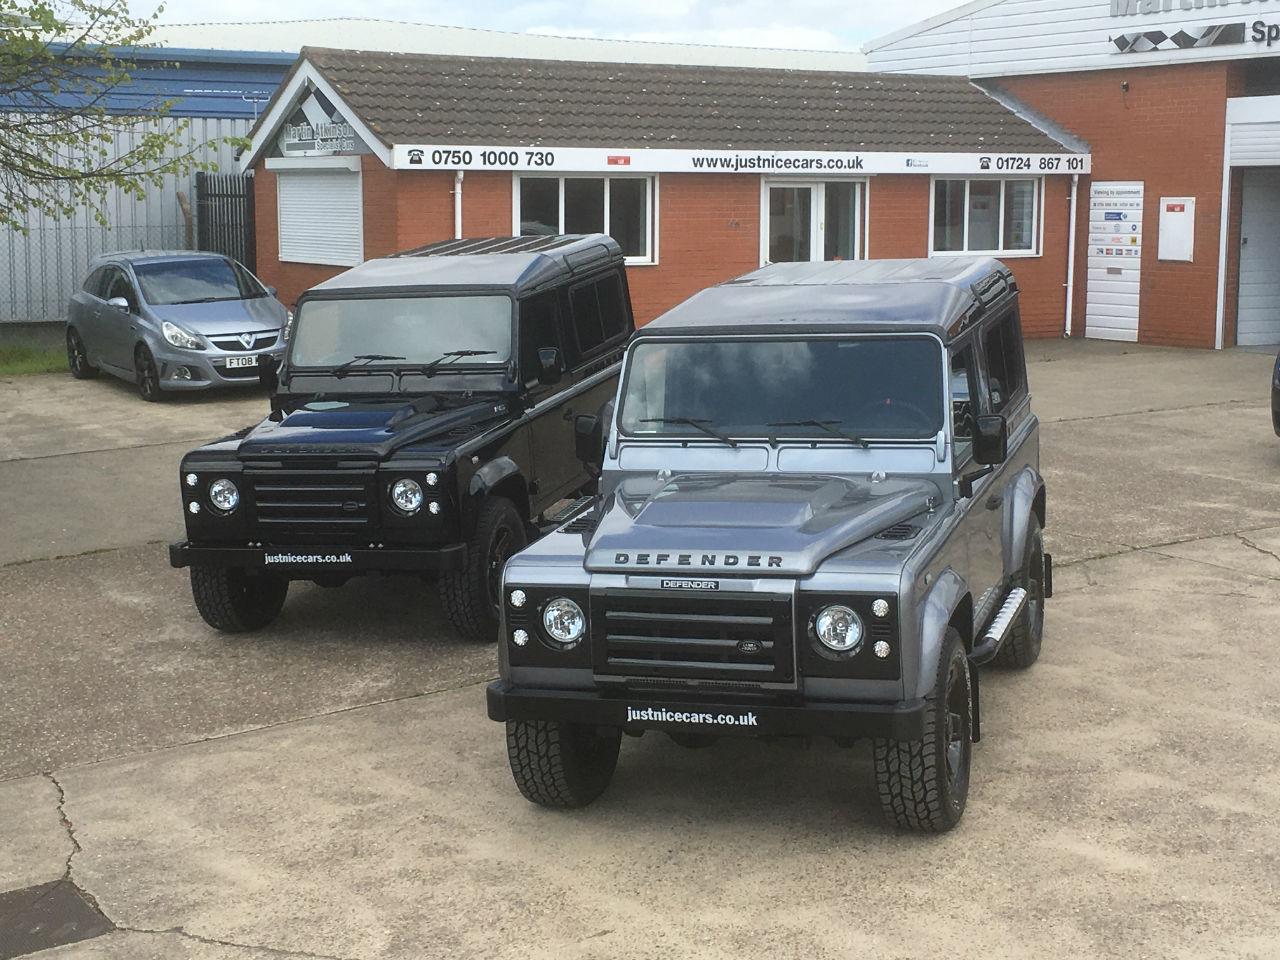 Land Rover Defender 2.2 SOLD GOING TO LONDON Four Wheel Drive Diesel Black